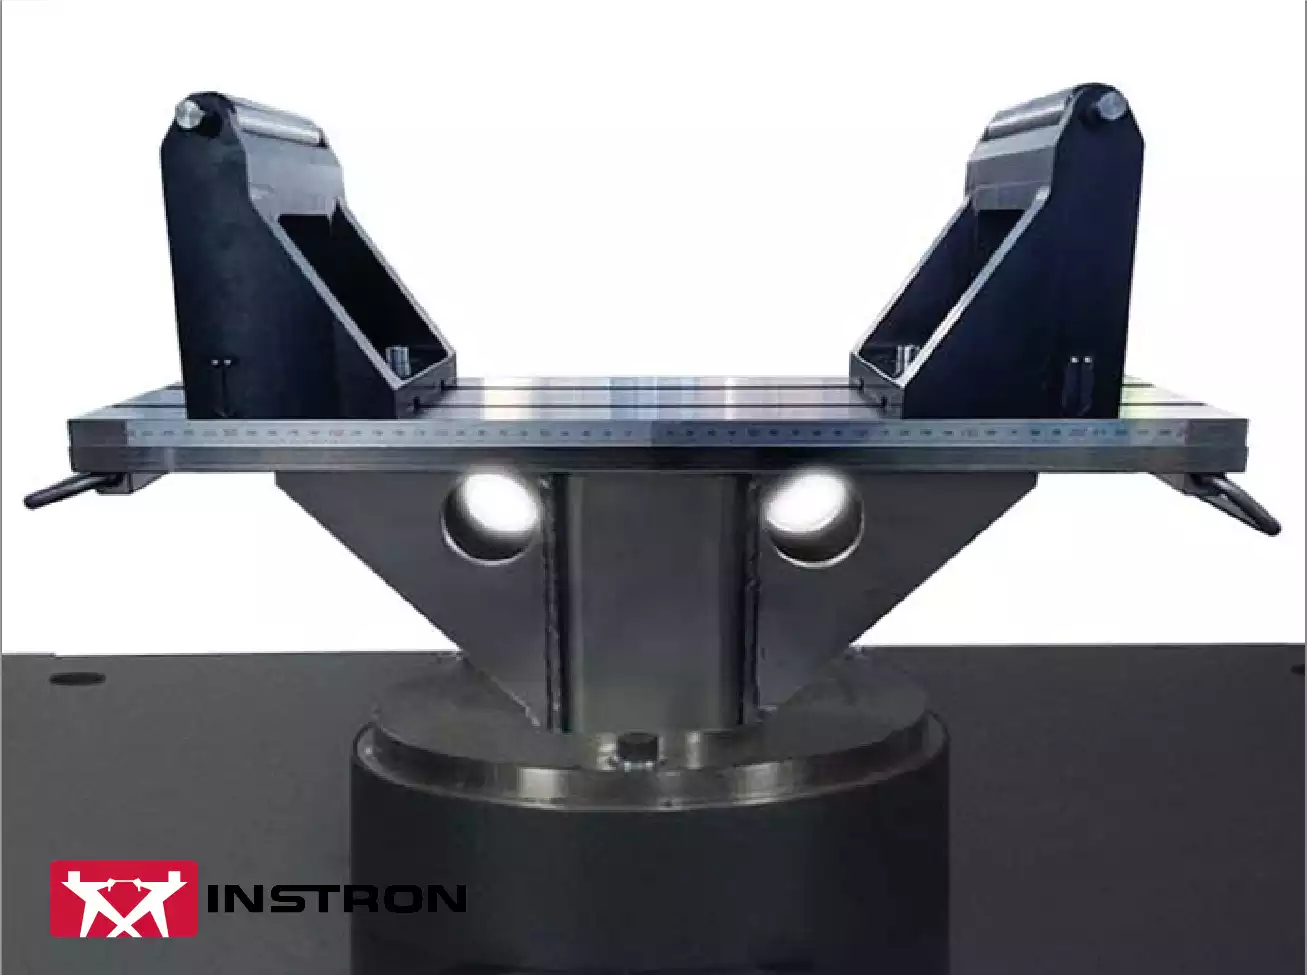 Instron Drop Weight Impact Testers